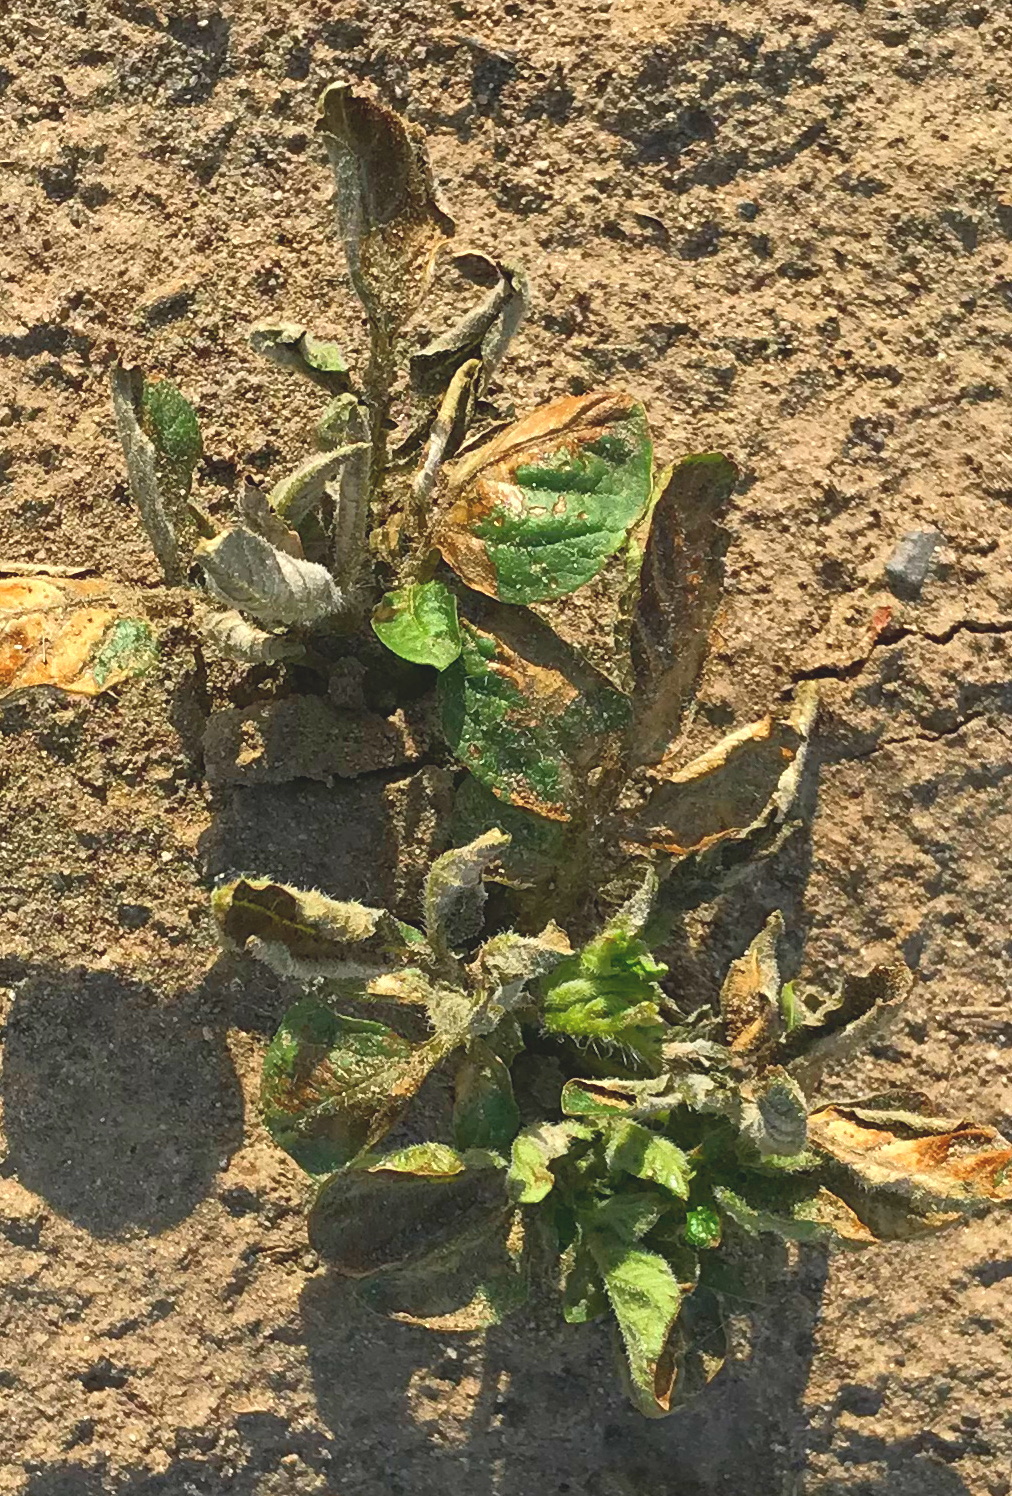 Potato plant injured after accidental exposure to the herbicides Goal (oxyfluorfen) and Buctril (bromoxynil) applied by chemigation to an adjacent onion crop.